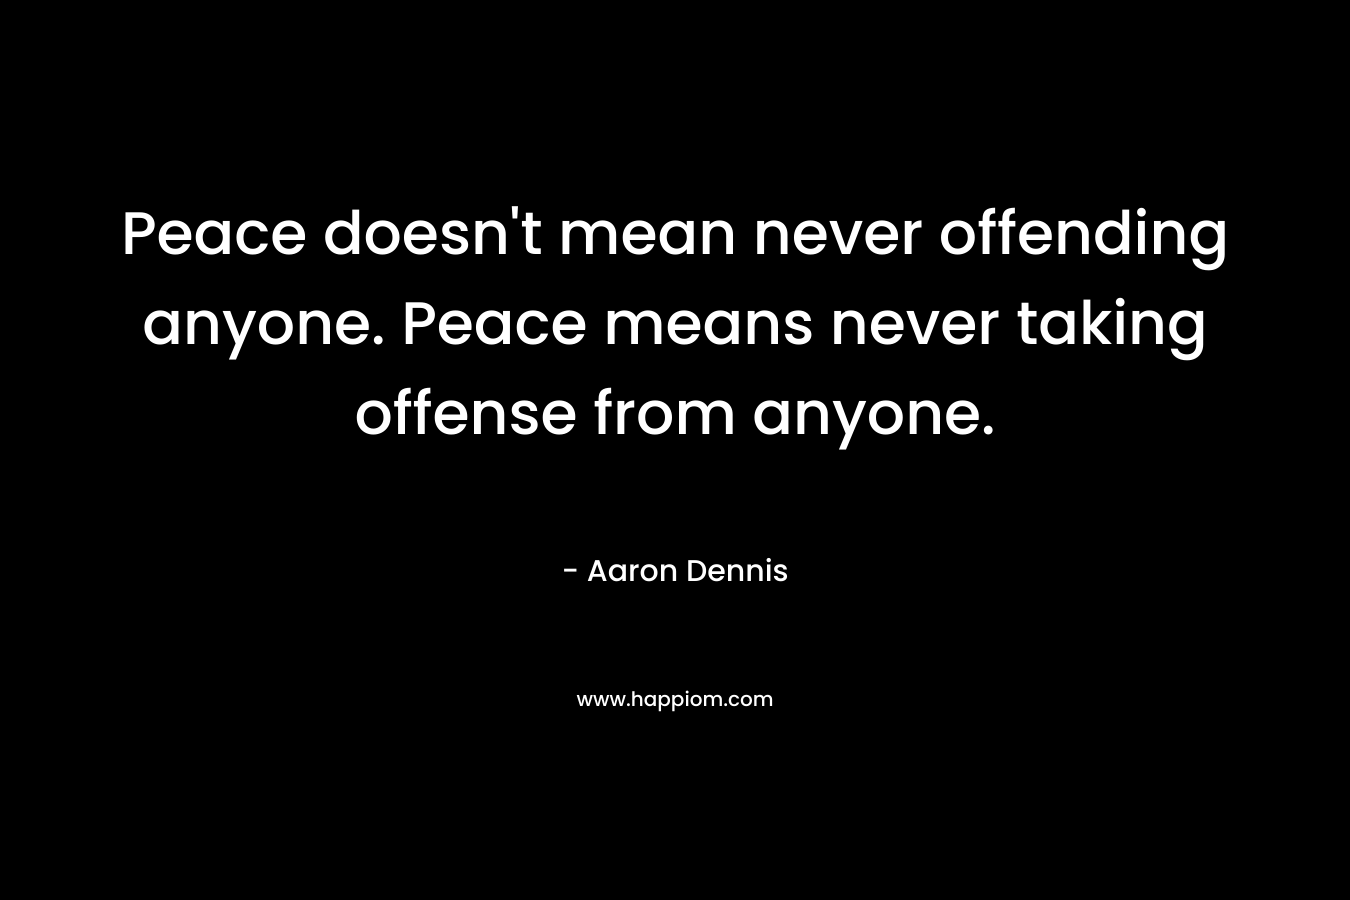 Peace doesn't mean never offending anyone. Peace means never taking offense from anyone.